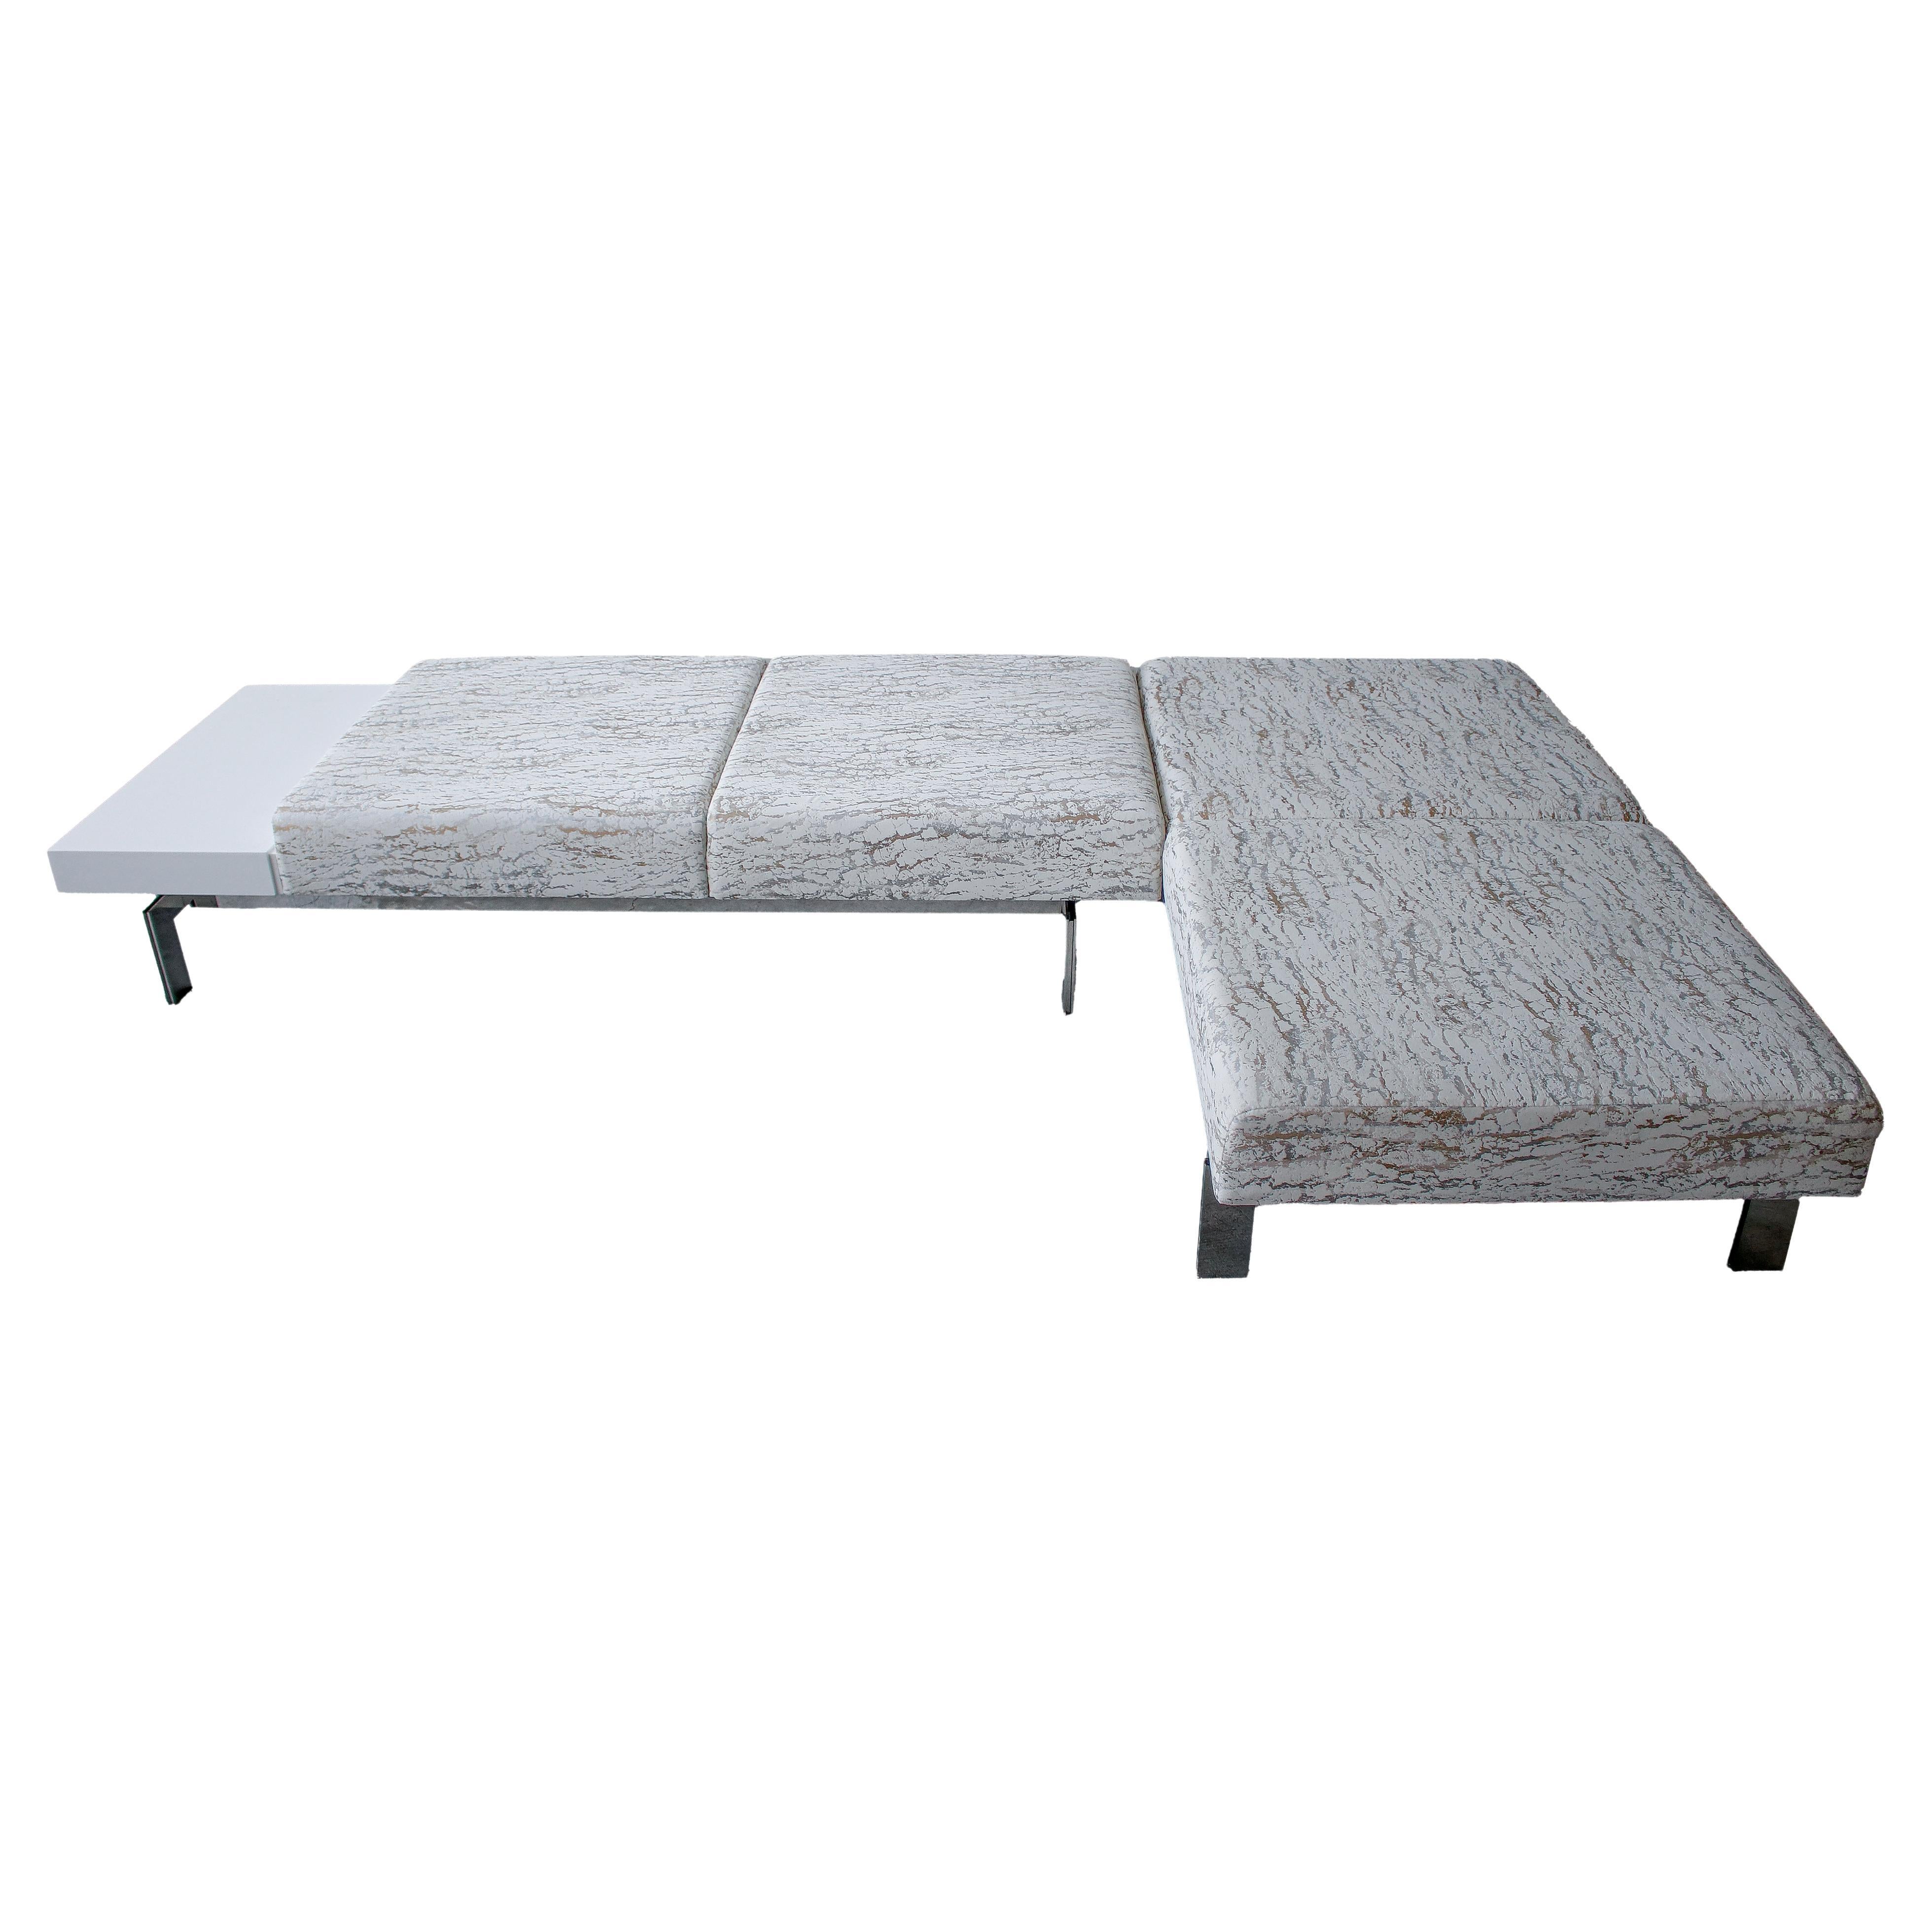 Pair of Modern Chrome Stainless Steel Benches For Sale